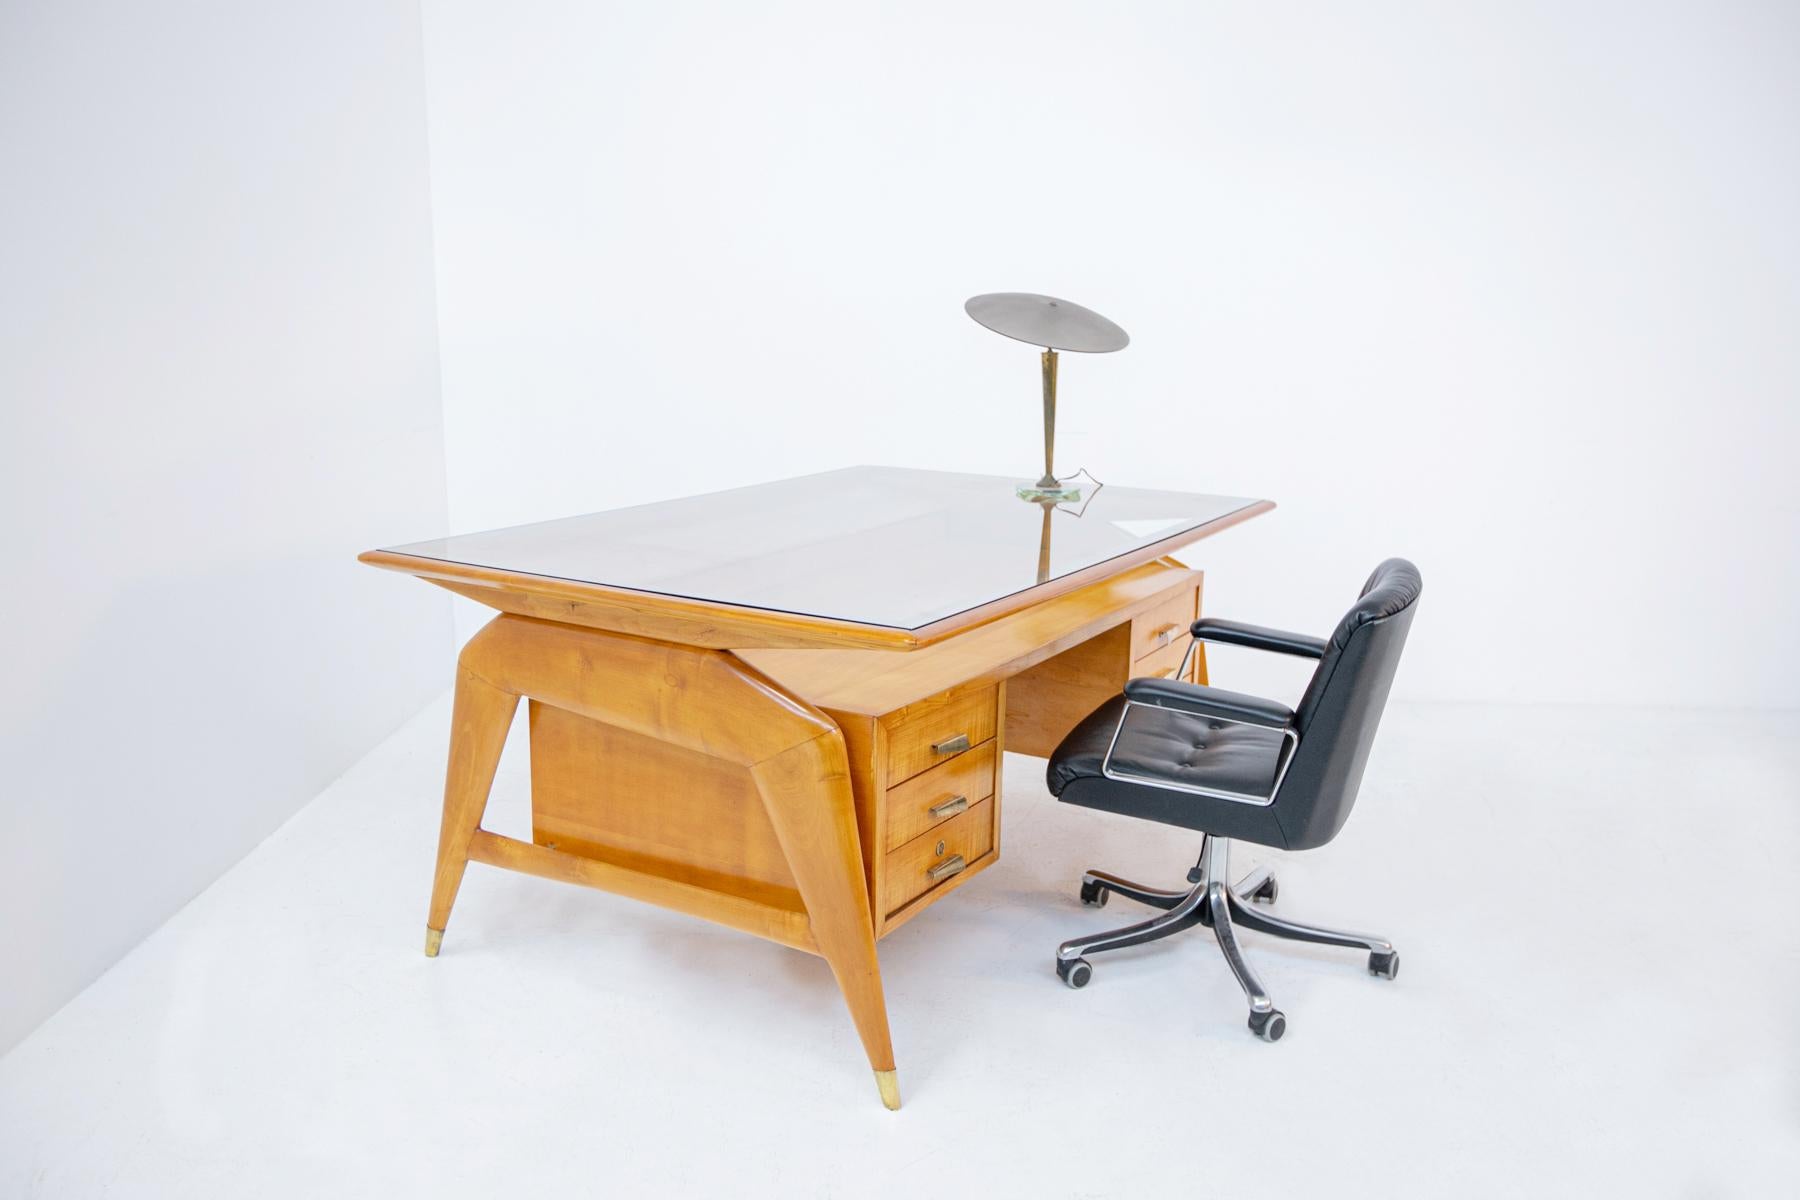 Important and rare desk by Carlo de Carli of the 1950s. With this desk Carlo de Carli poses the problem of overcoming a strictly rationalist approach and tries to give new life to his furniture with new forms, provoked vital suggestions such as